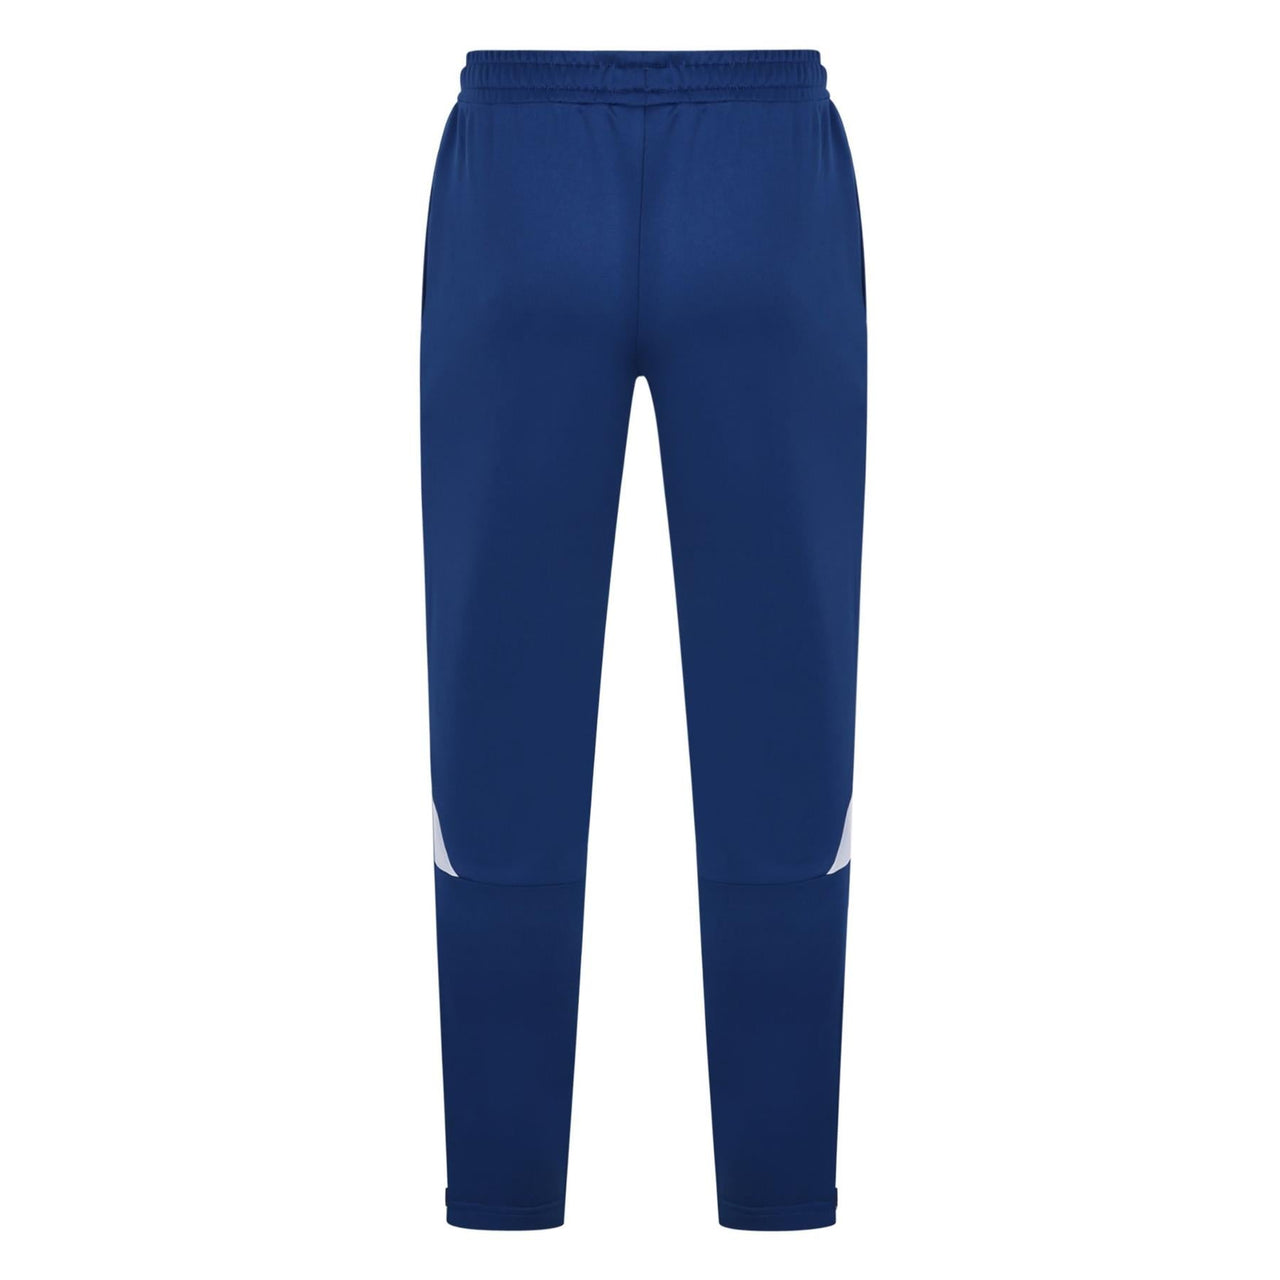 Umbro Mens Total Training Tapered Pant | Navy